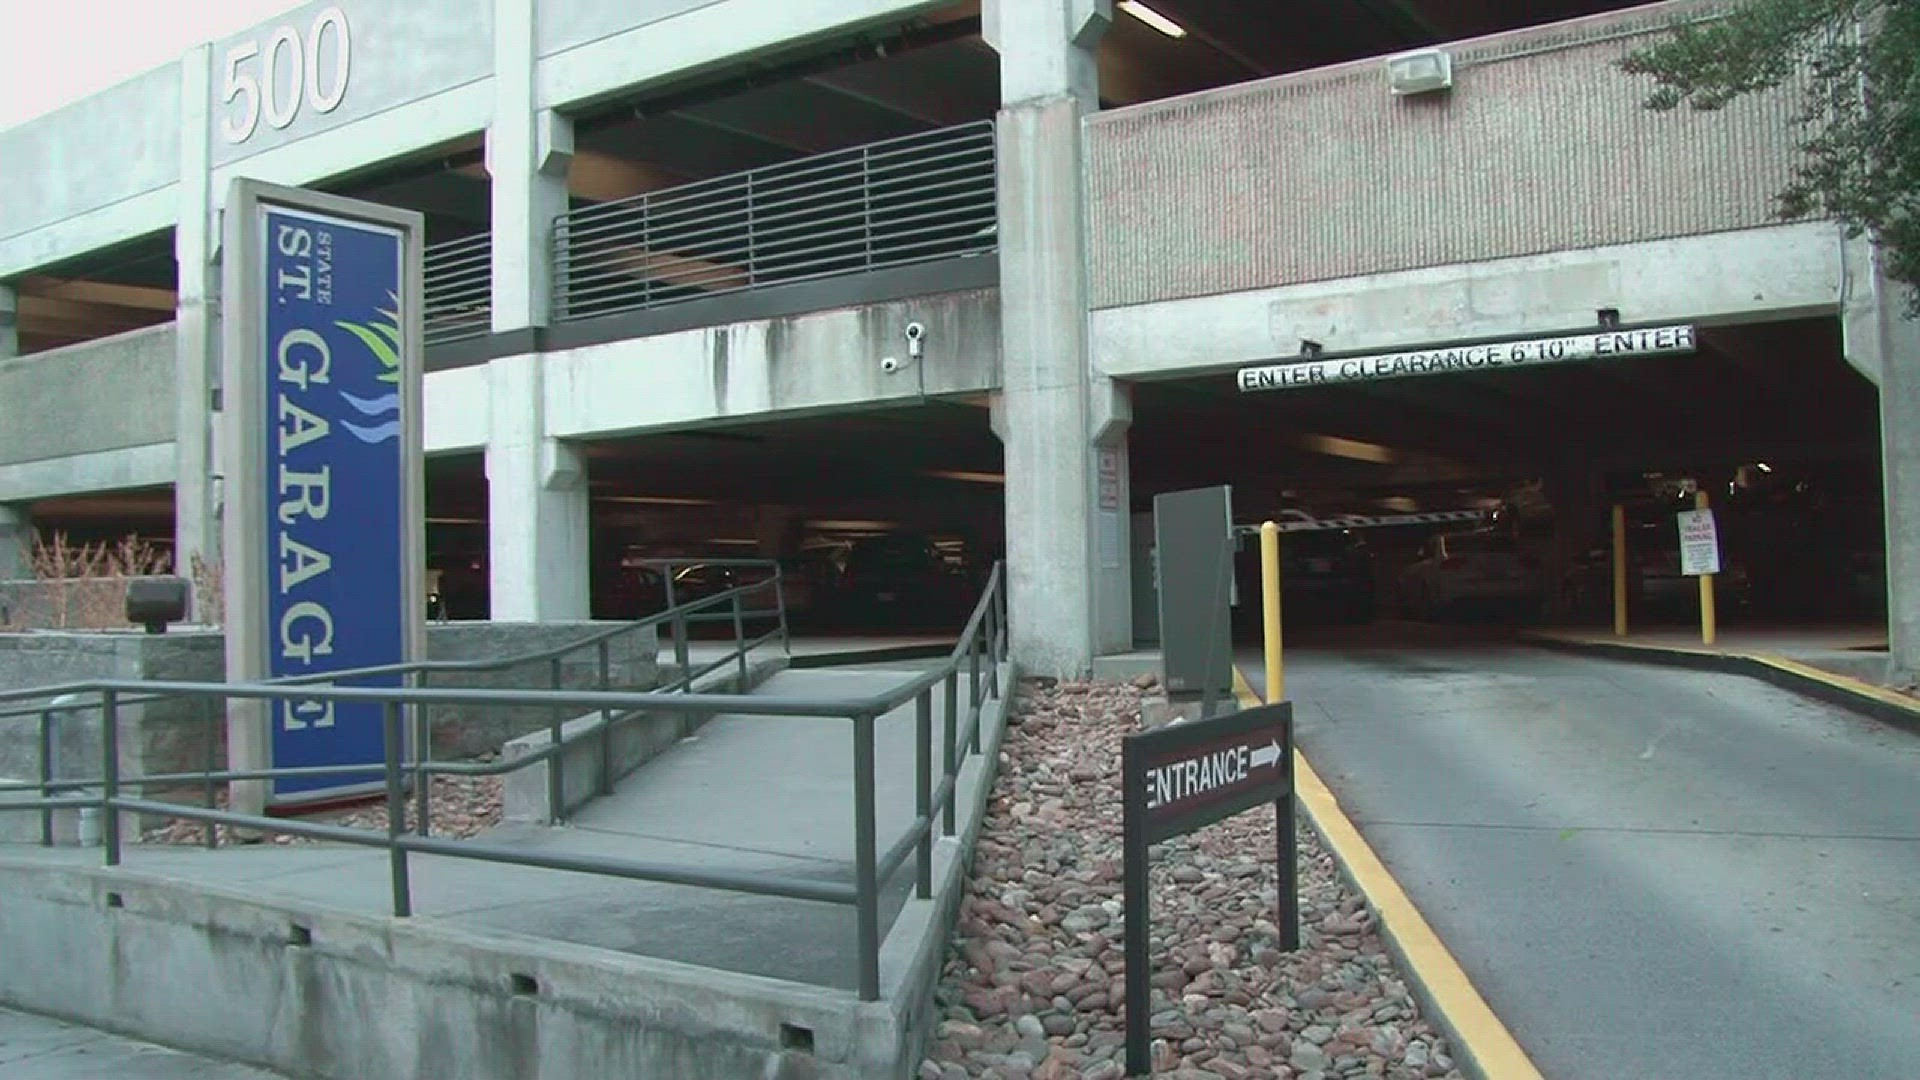 Oct. 12, 2017: There's a new plan to increase the number of parking spaces in downtown Knoxville.